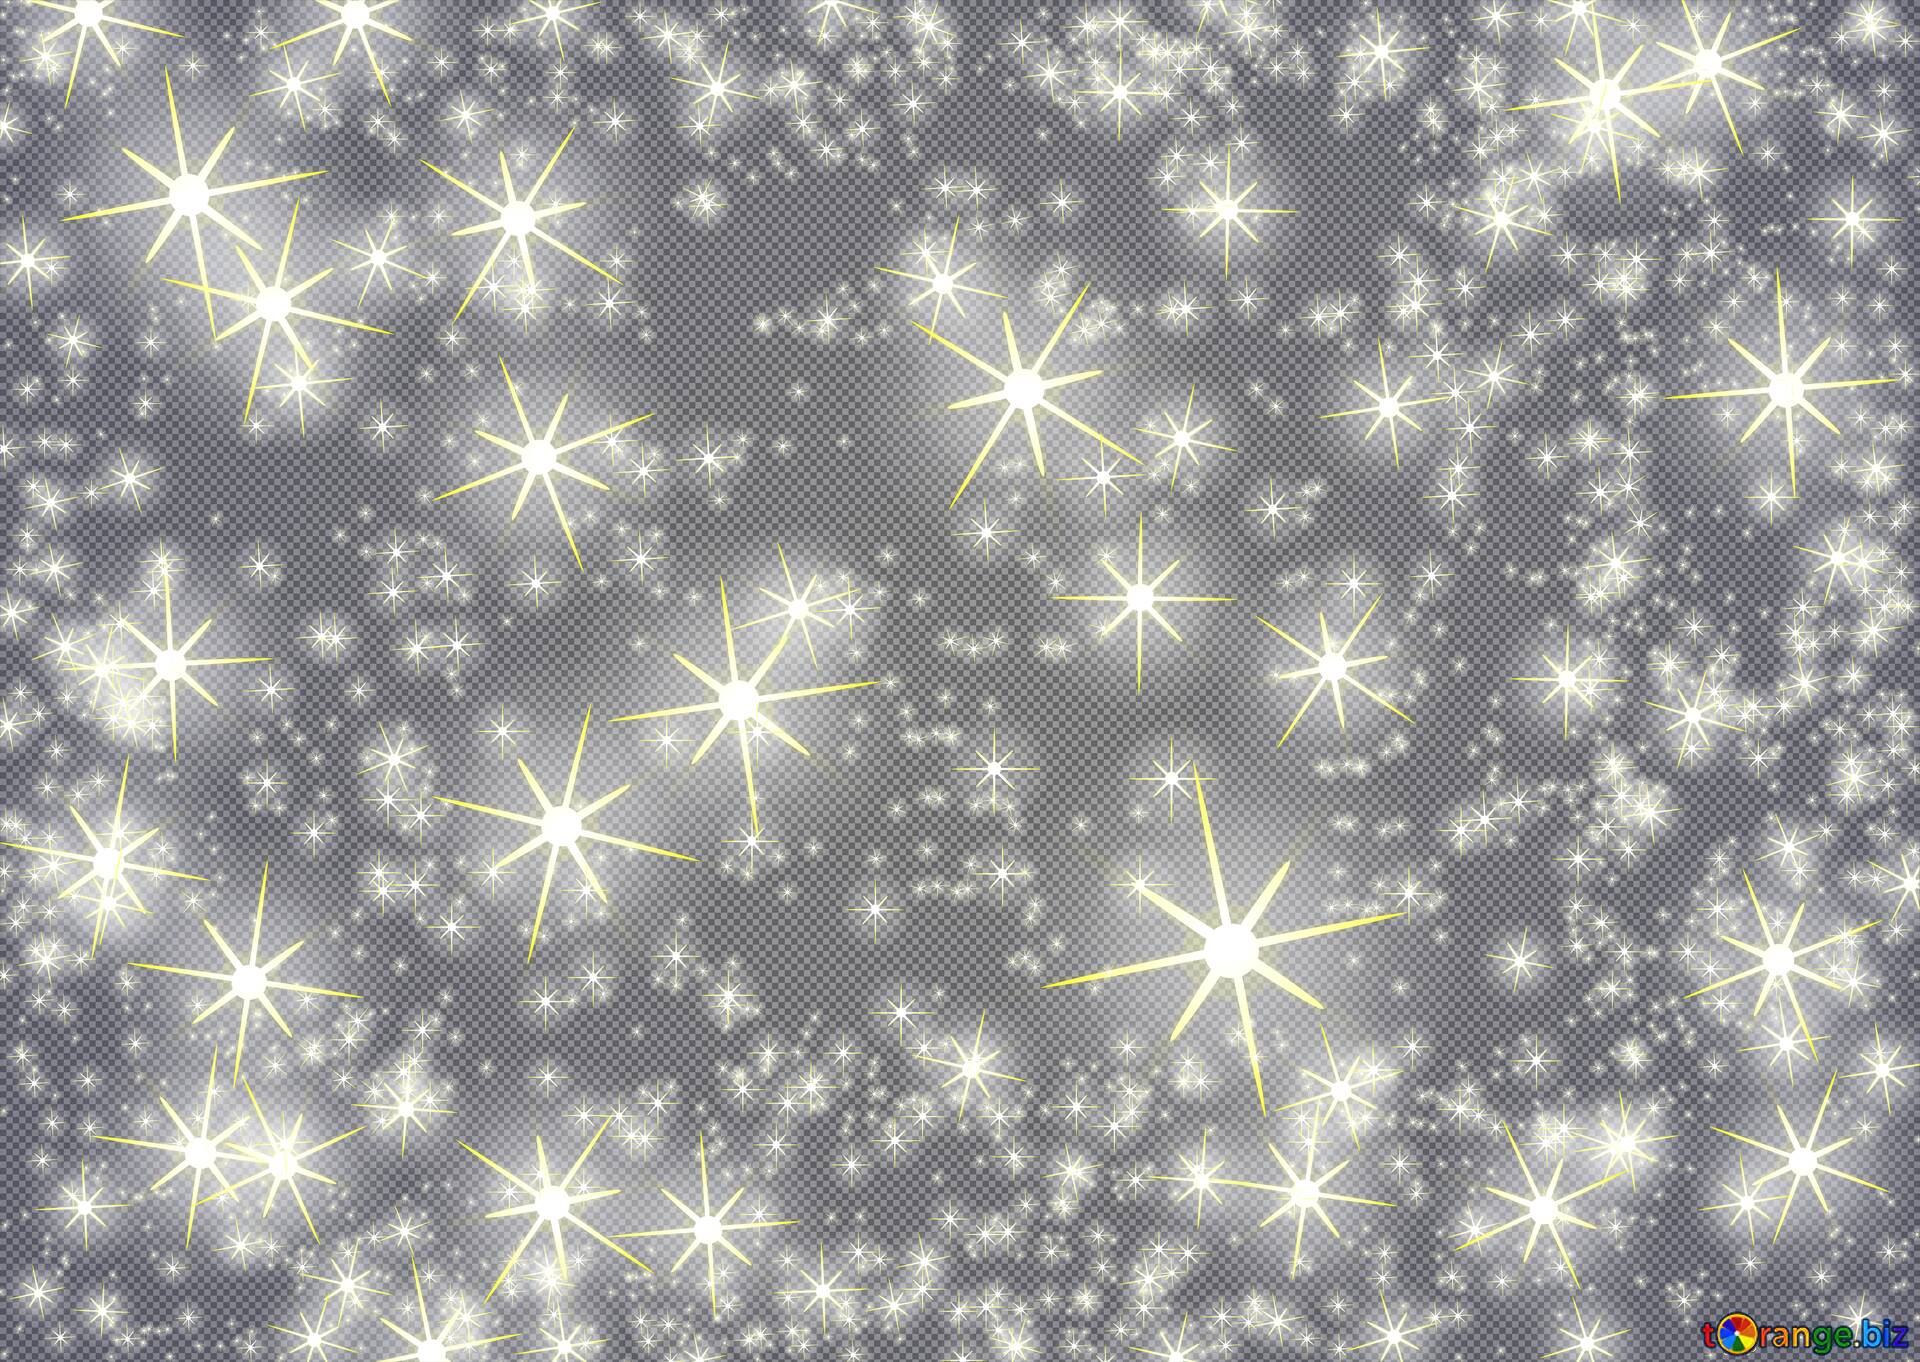 Graphic backgrounds image abstract holiday background with clusters of  bright huge white twinkling stars night star pattern images clipart № 54495   ~ free pics on cc-by license